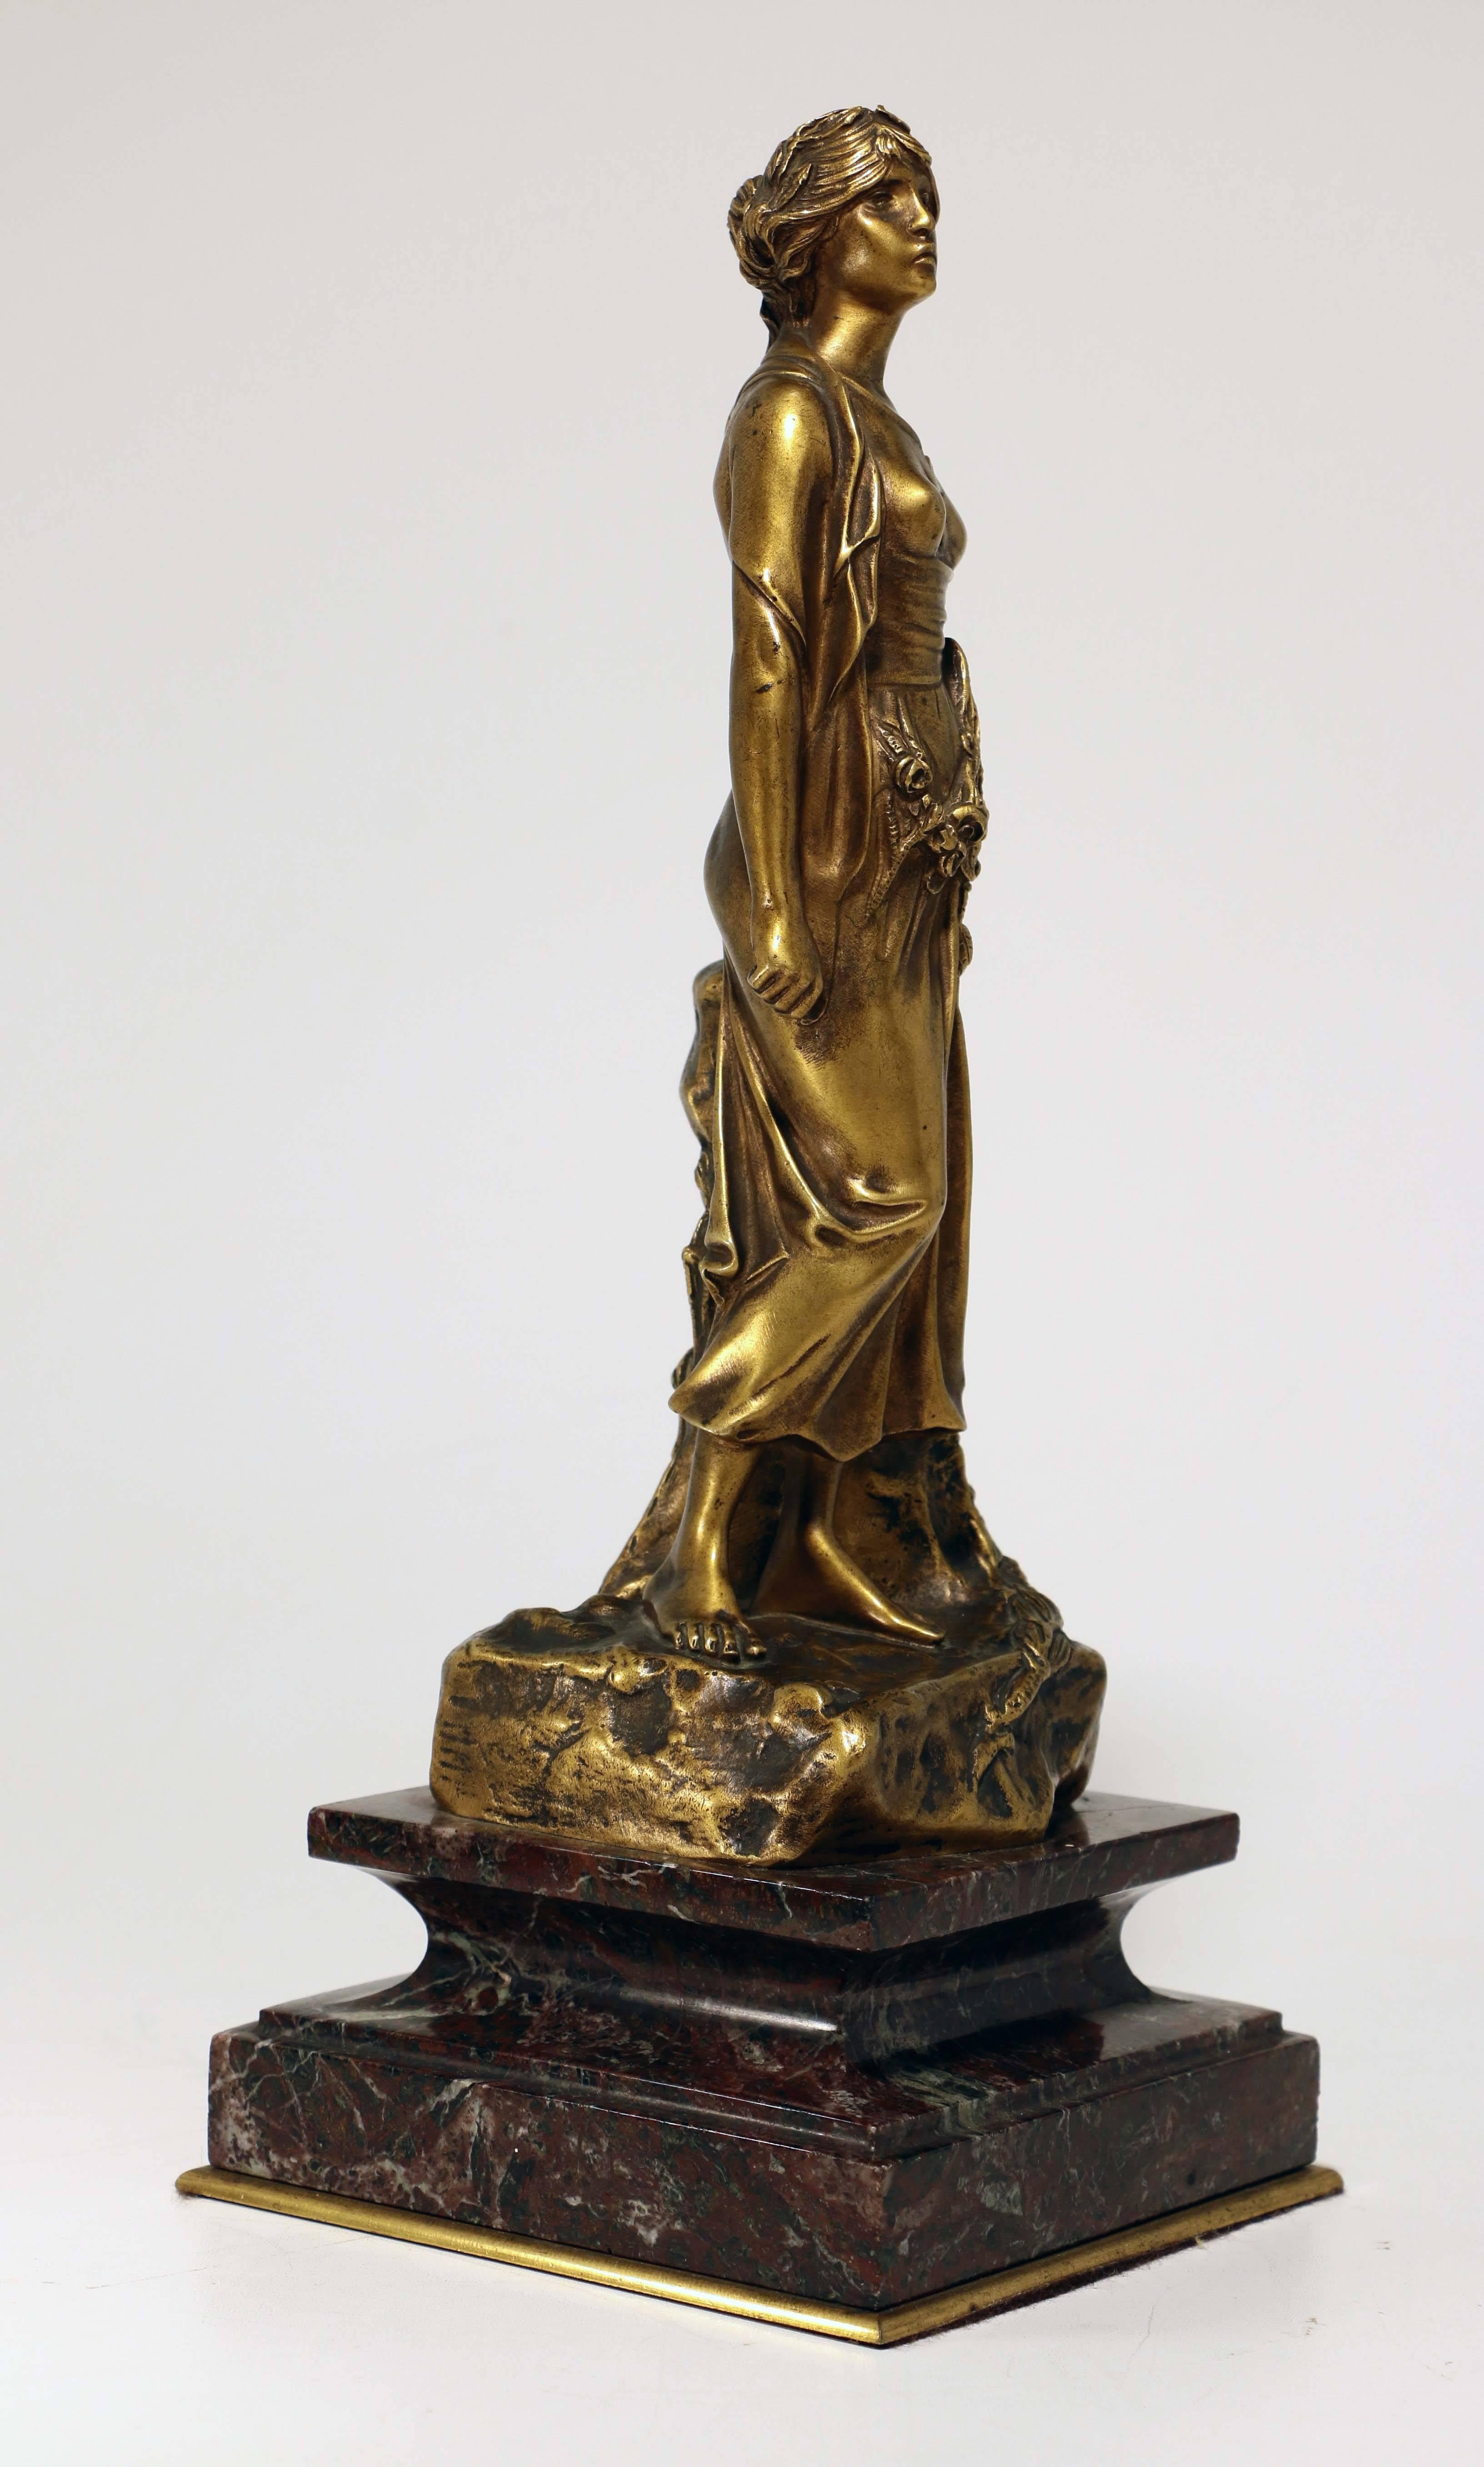 This sumptuous French bronze of an attractive young woman dates from the Belle Époque. Simply dressed in a clinging shift and with a garland of flowers at her waist, she conveys both youth and modernity, somewhat anticipating the 1920s but on this